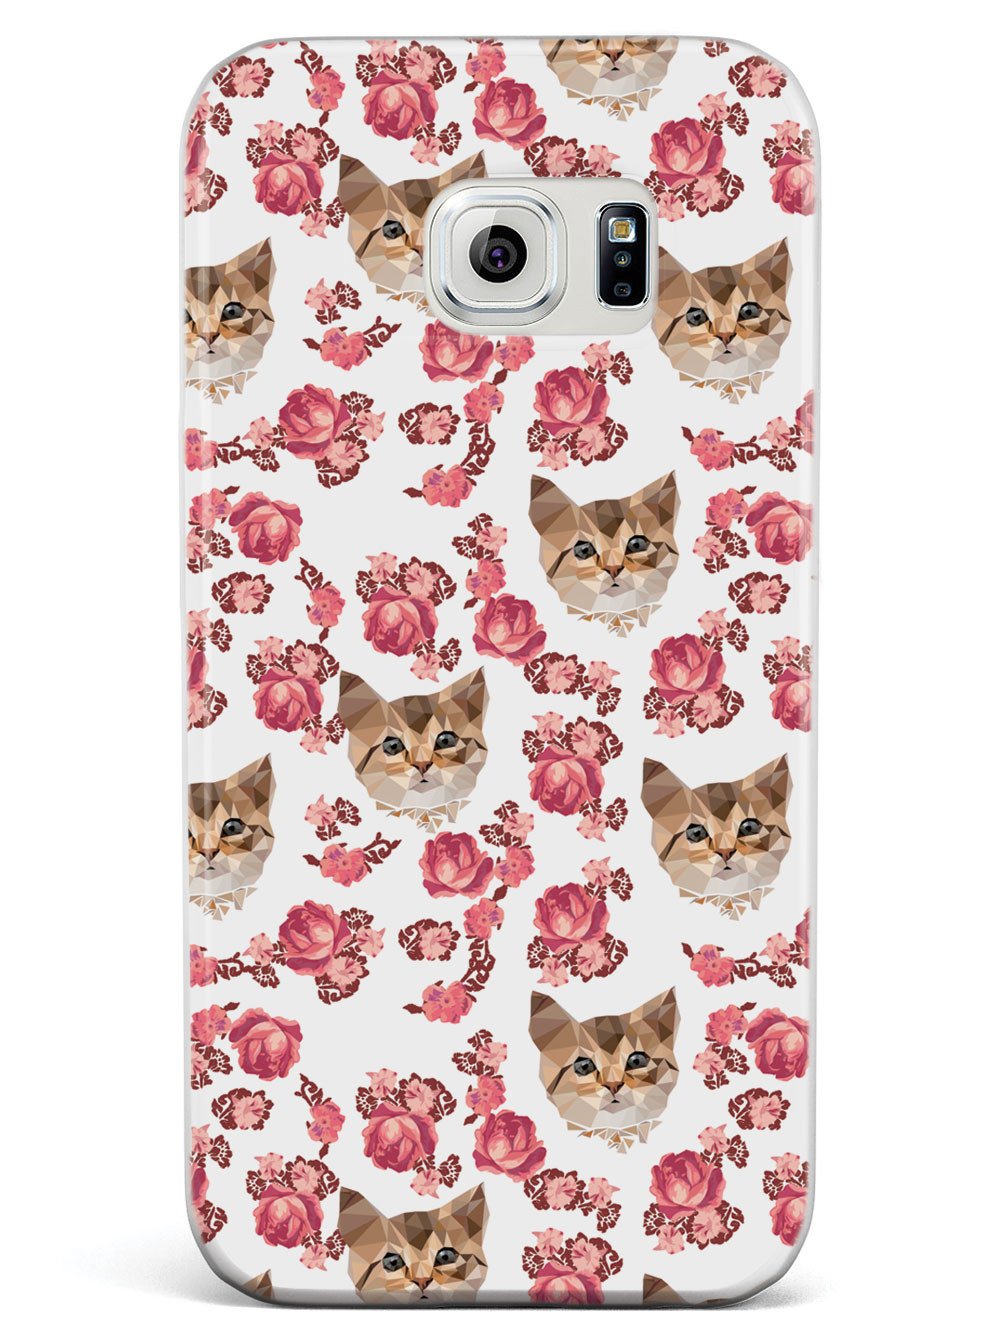 Roses and Kittens Pattern - White Case